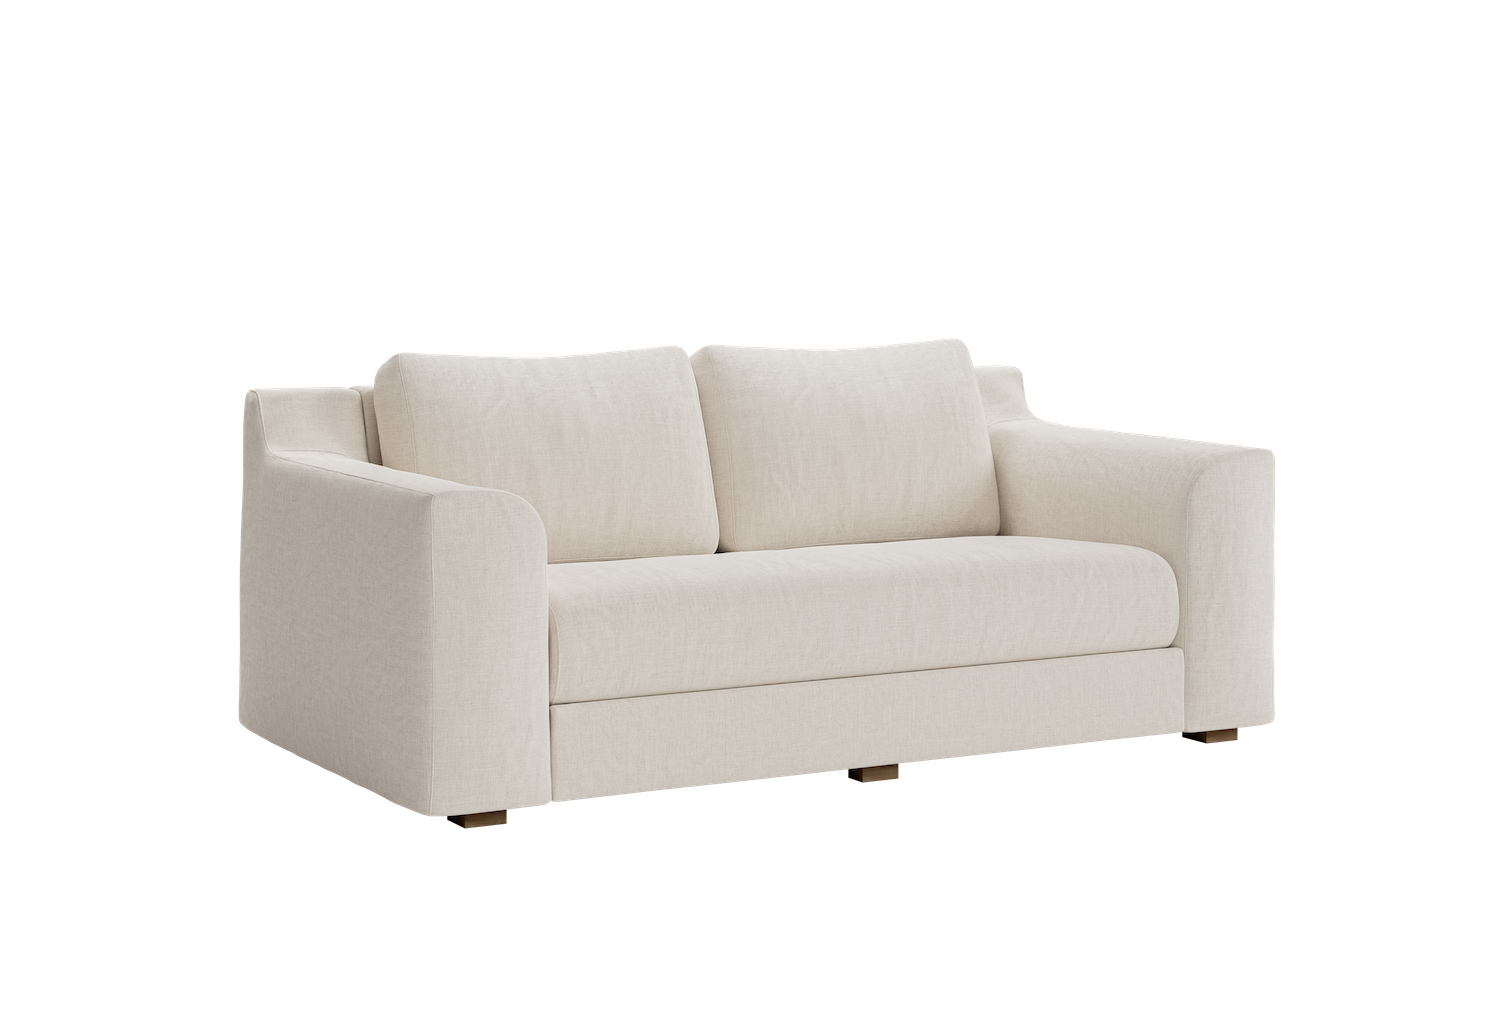 The Elevate Loveseat in Upcycled Poly